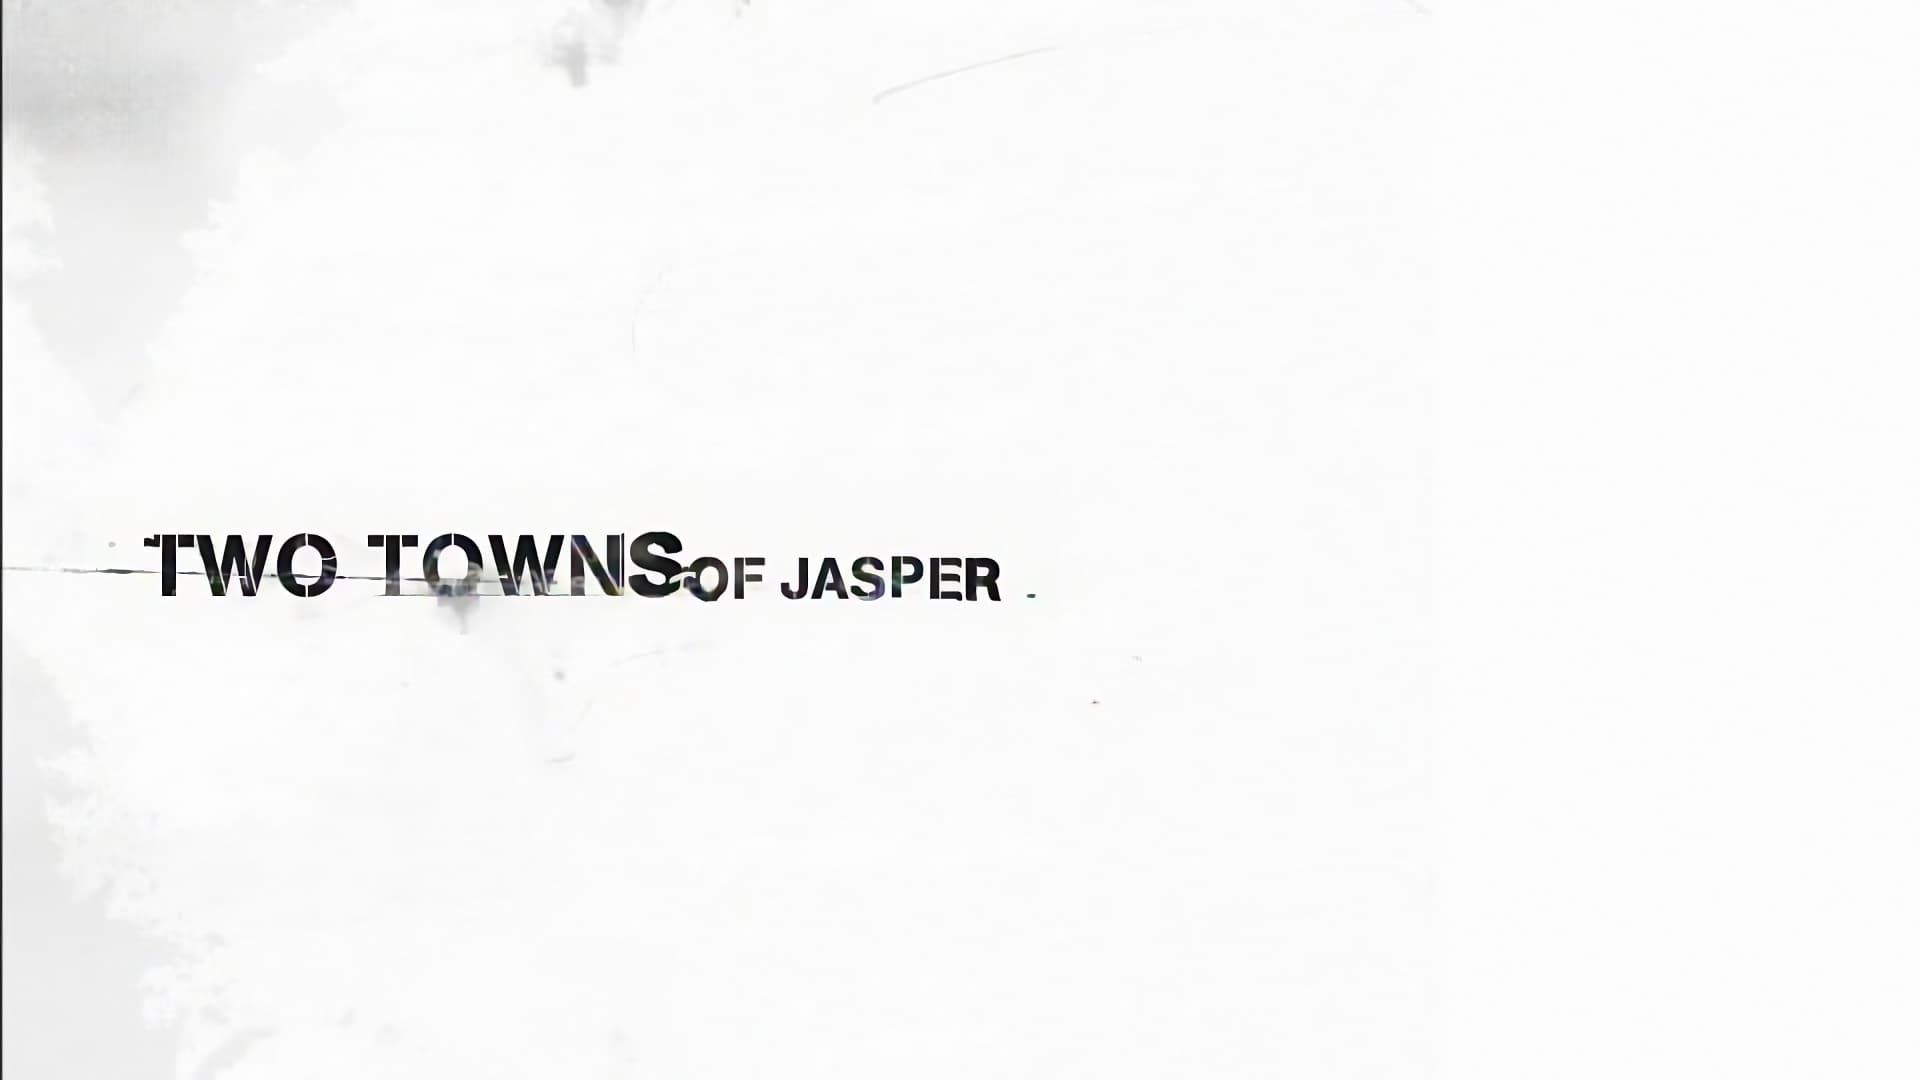 Two Towns of Jasper background